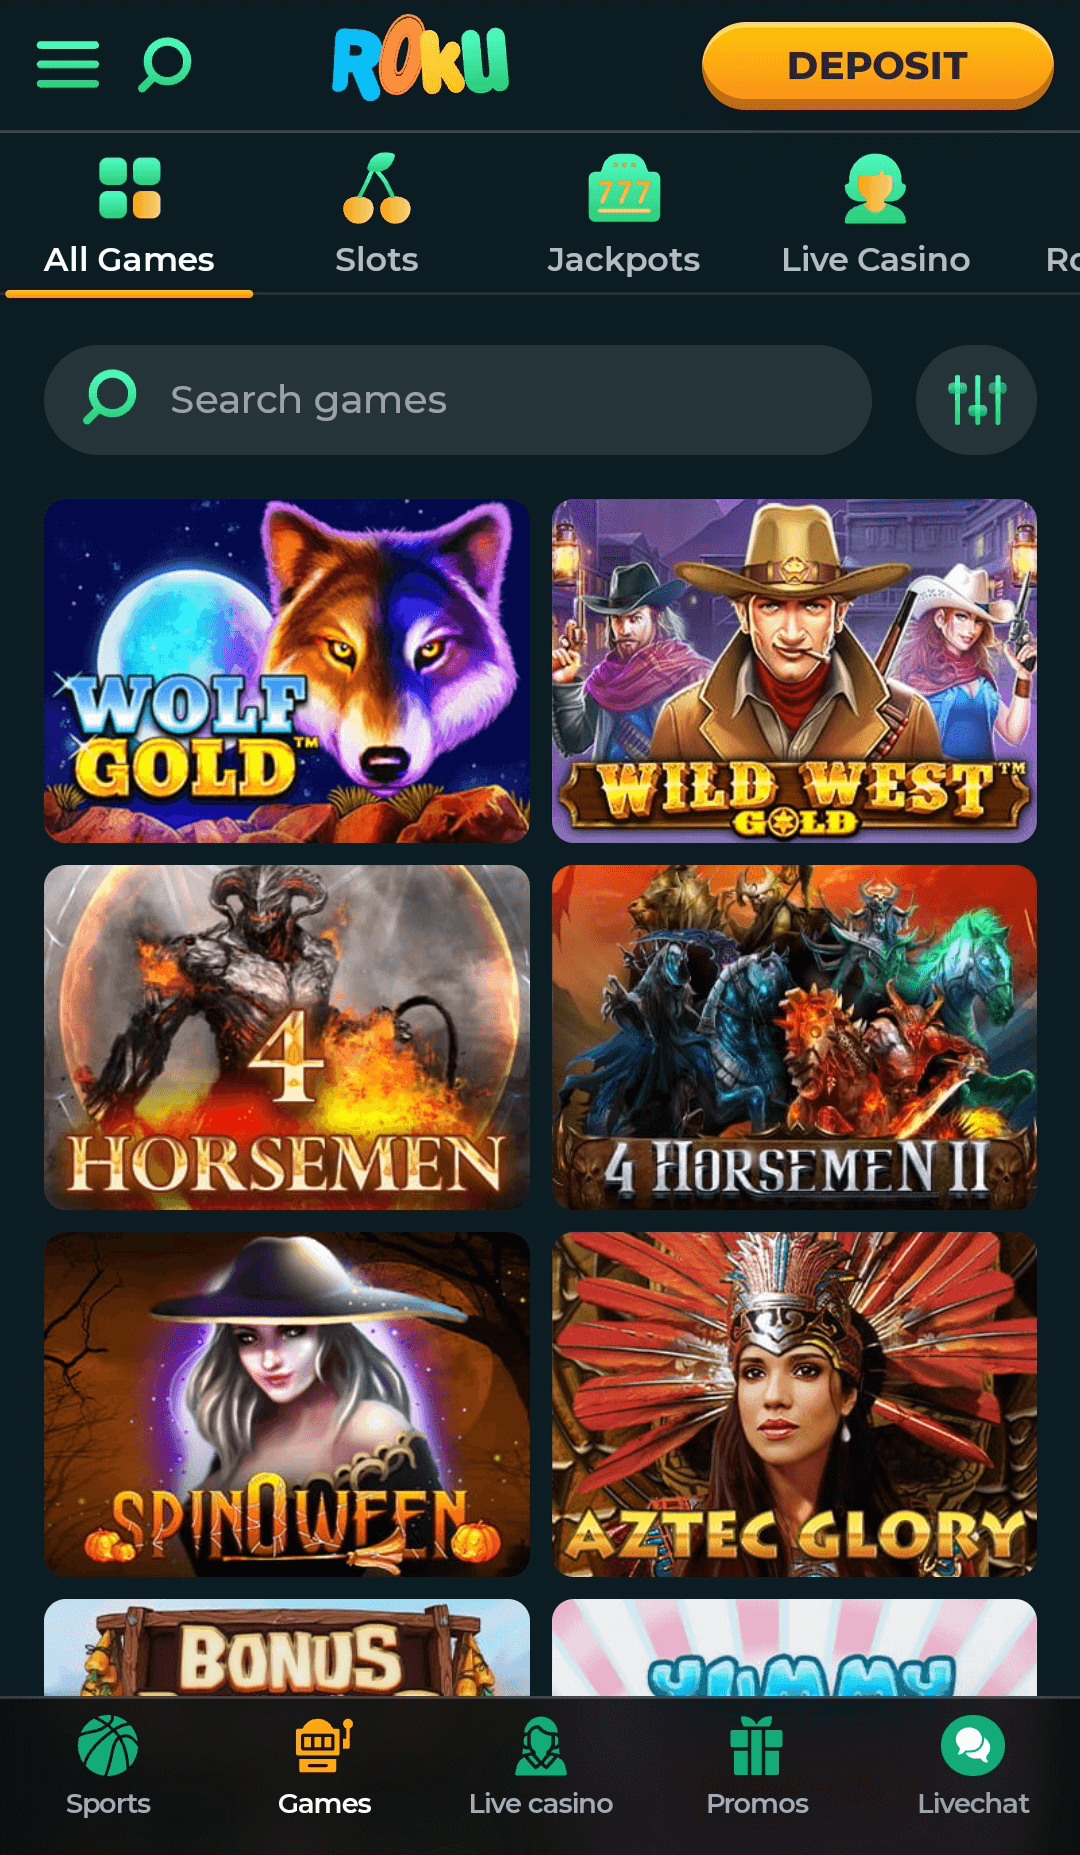 Casino section in the Rokubet mobile app